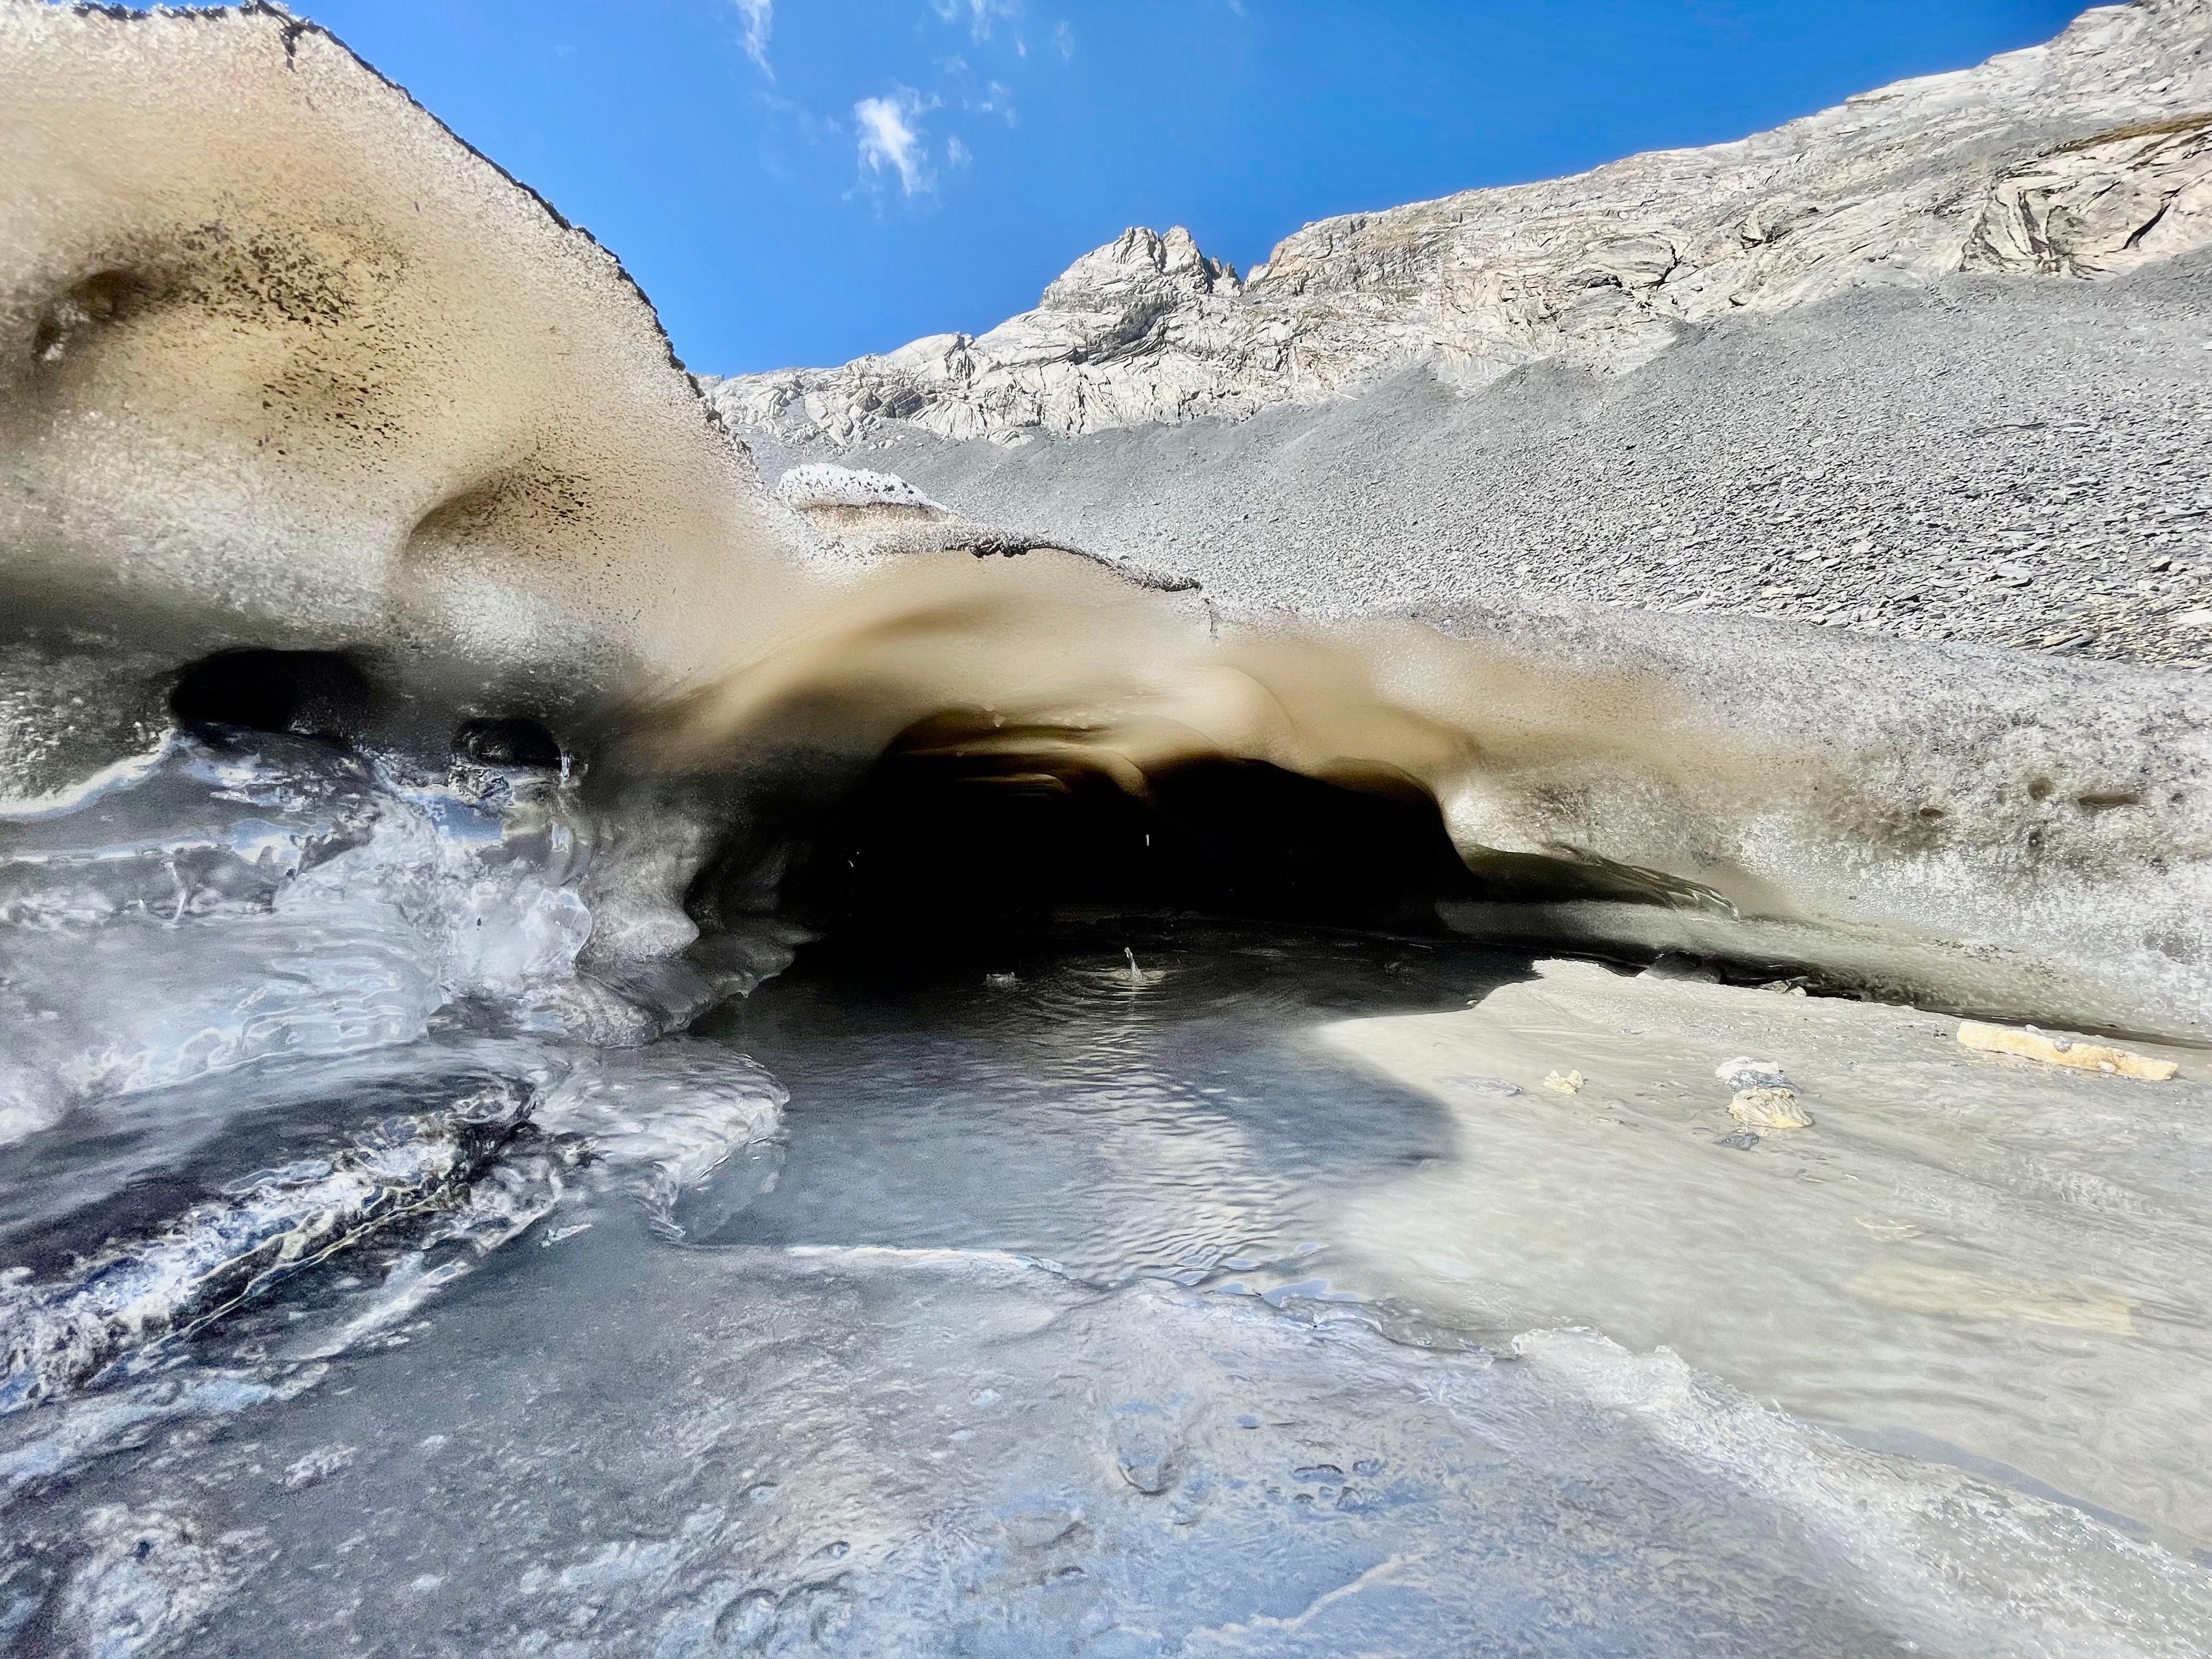 A meltwater stream flows from beneath the Forcle Glacier near Chamoson, Switzerland